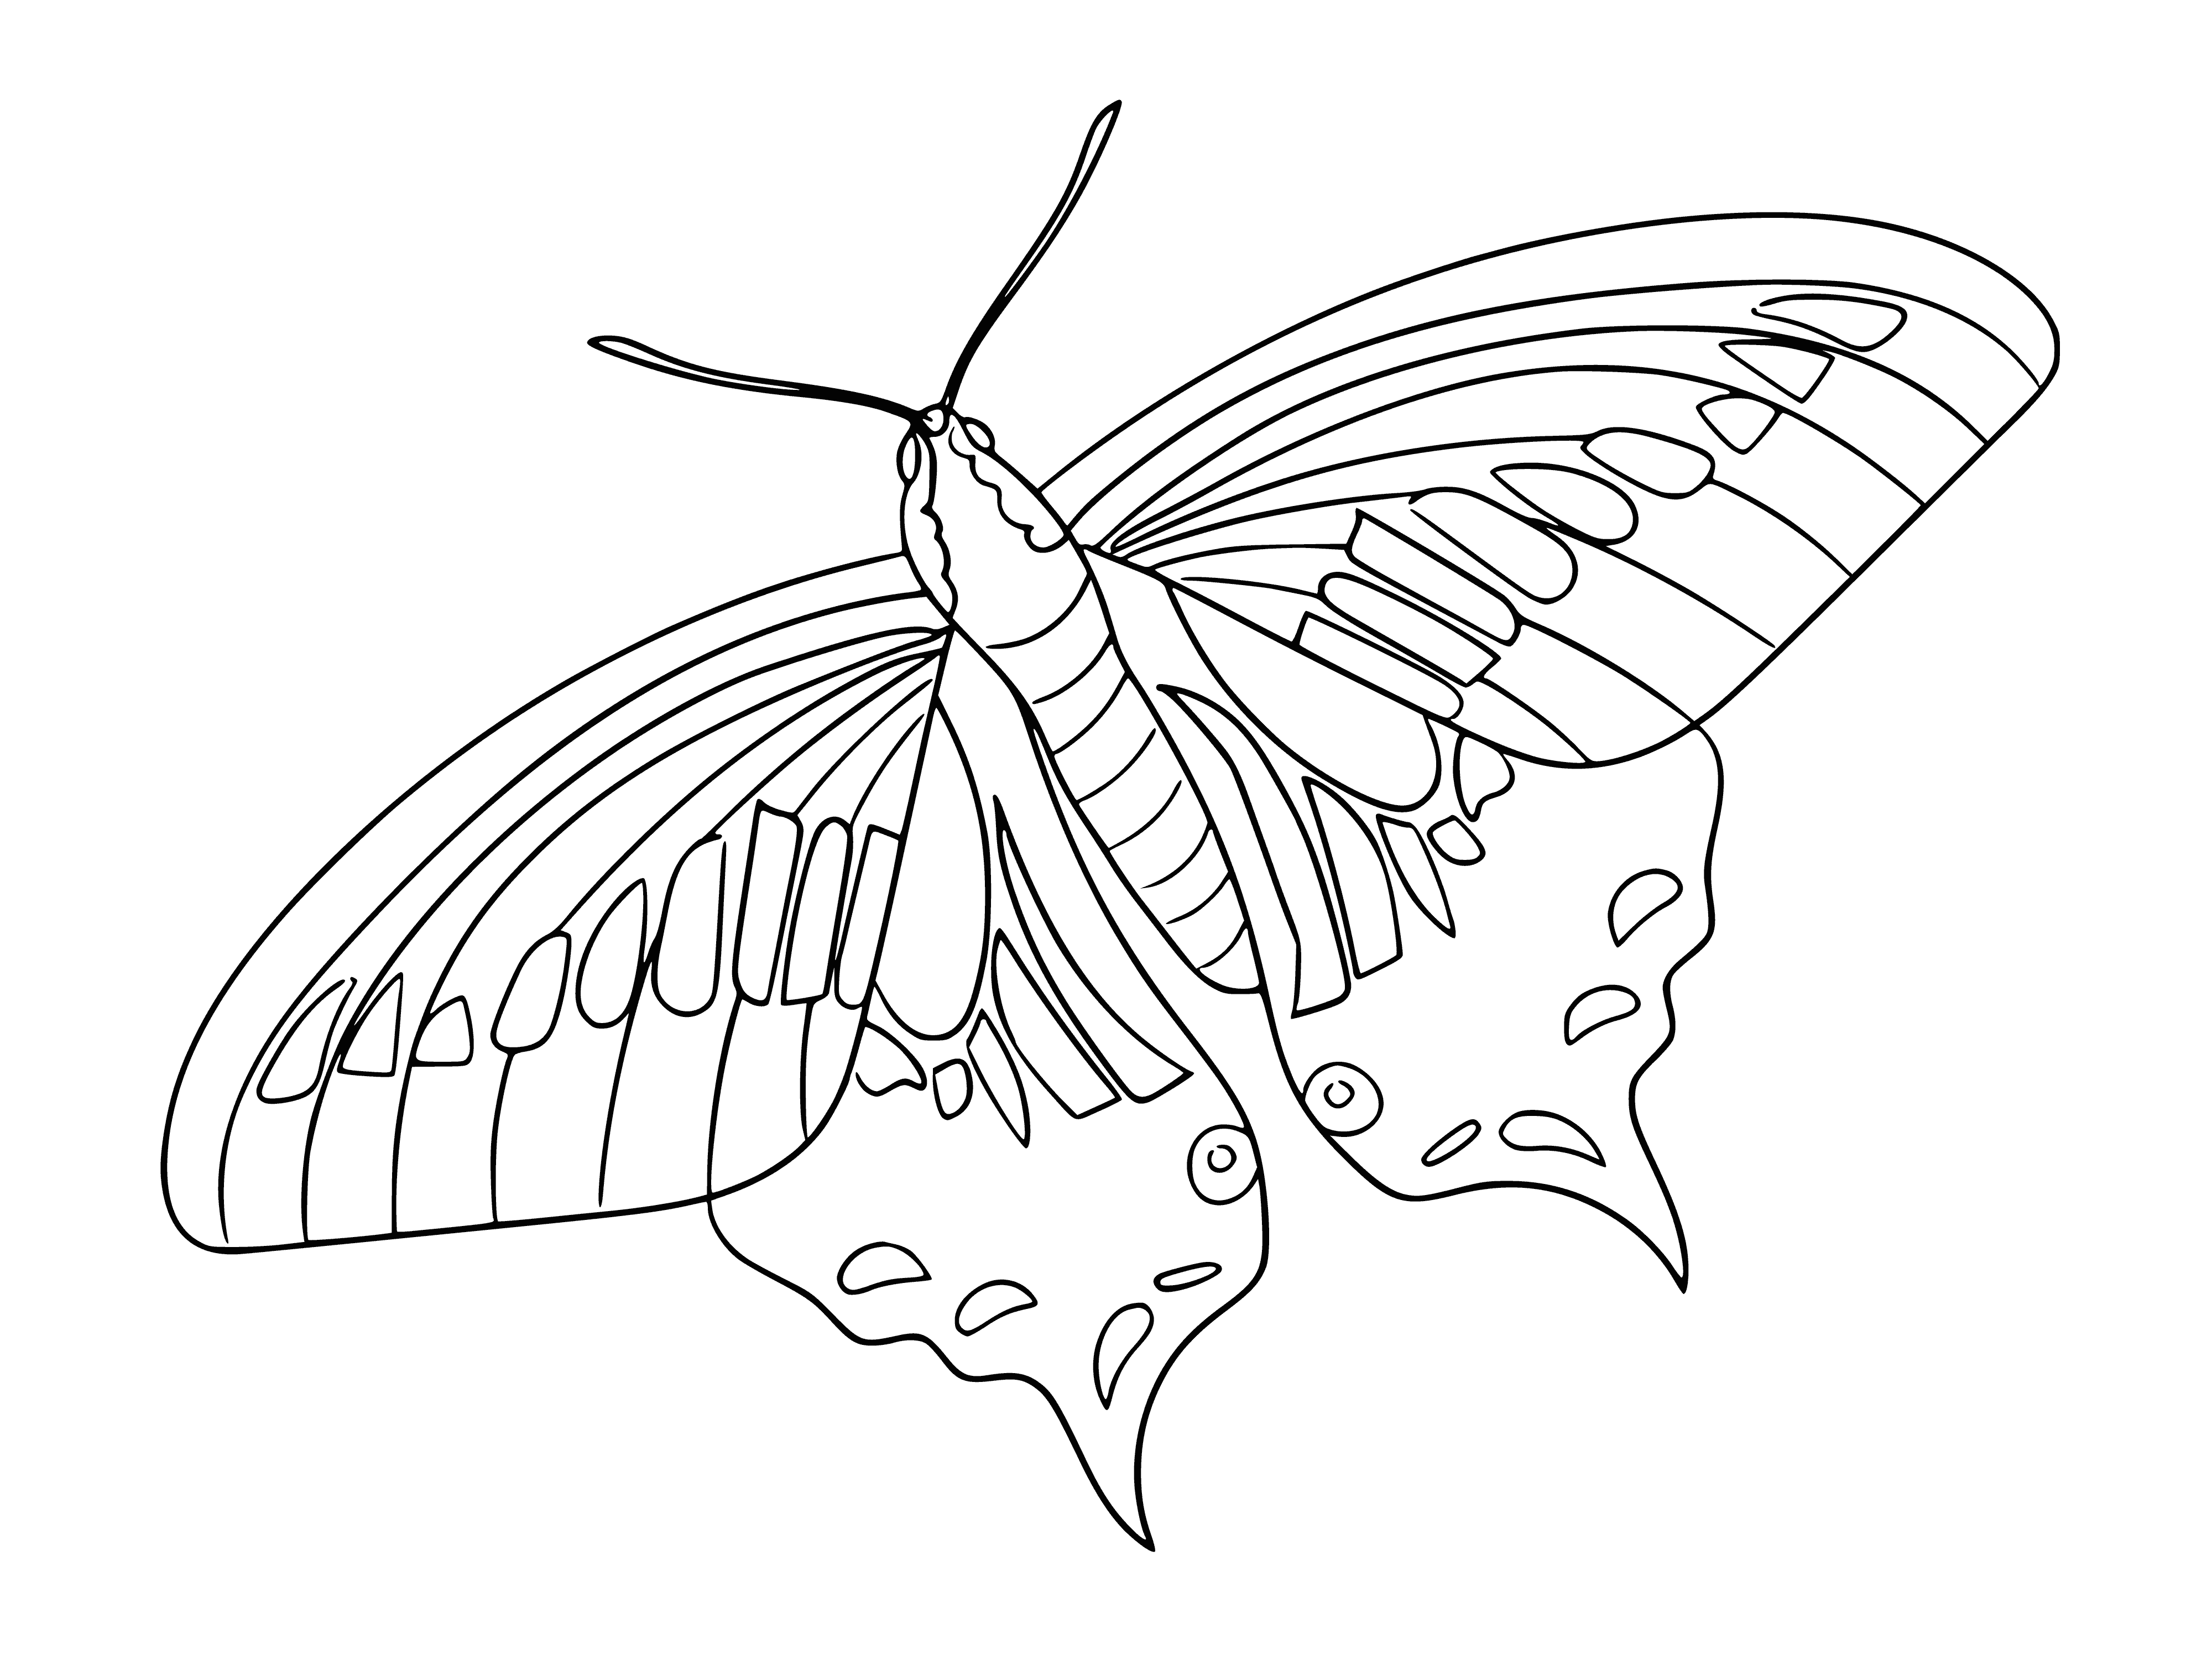 coloring page: Four butterflies with unique colorful wings and patterns, from orange/black to black/yellow/white.